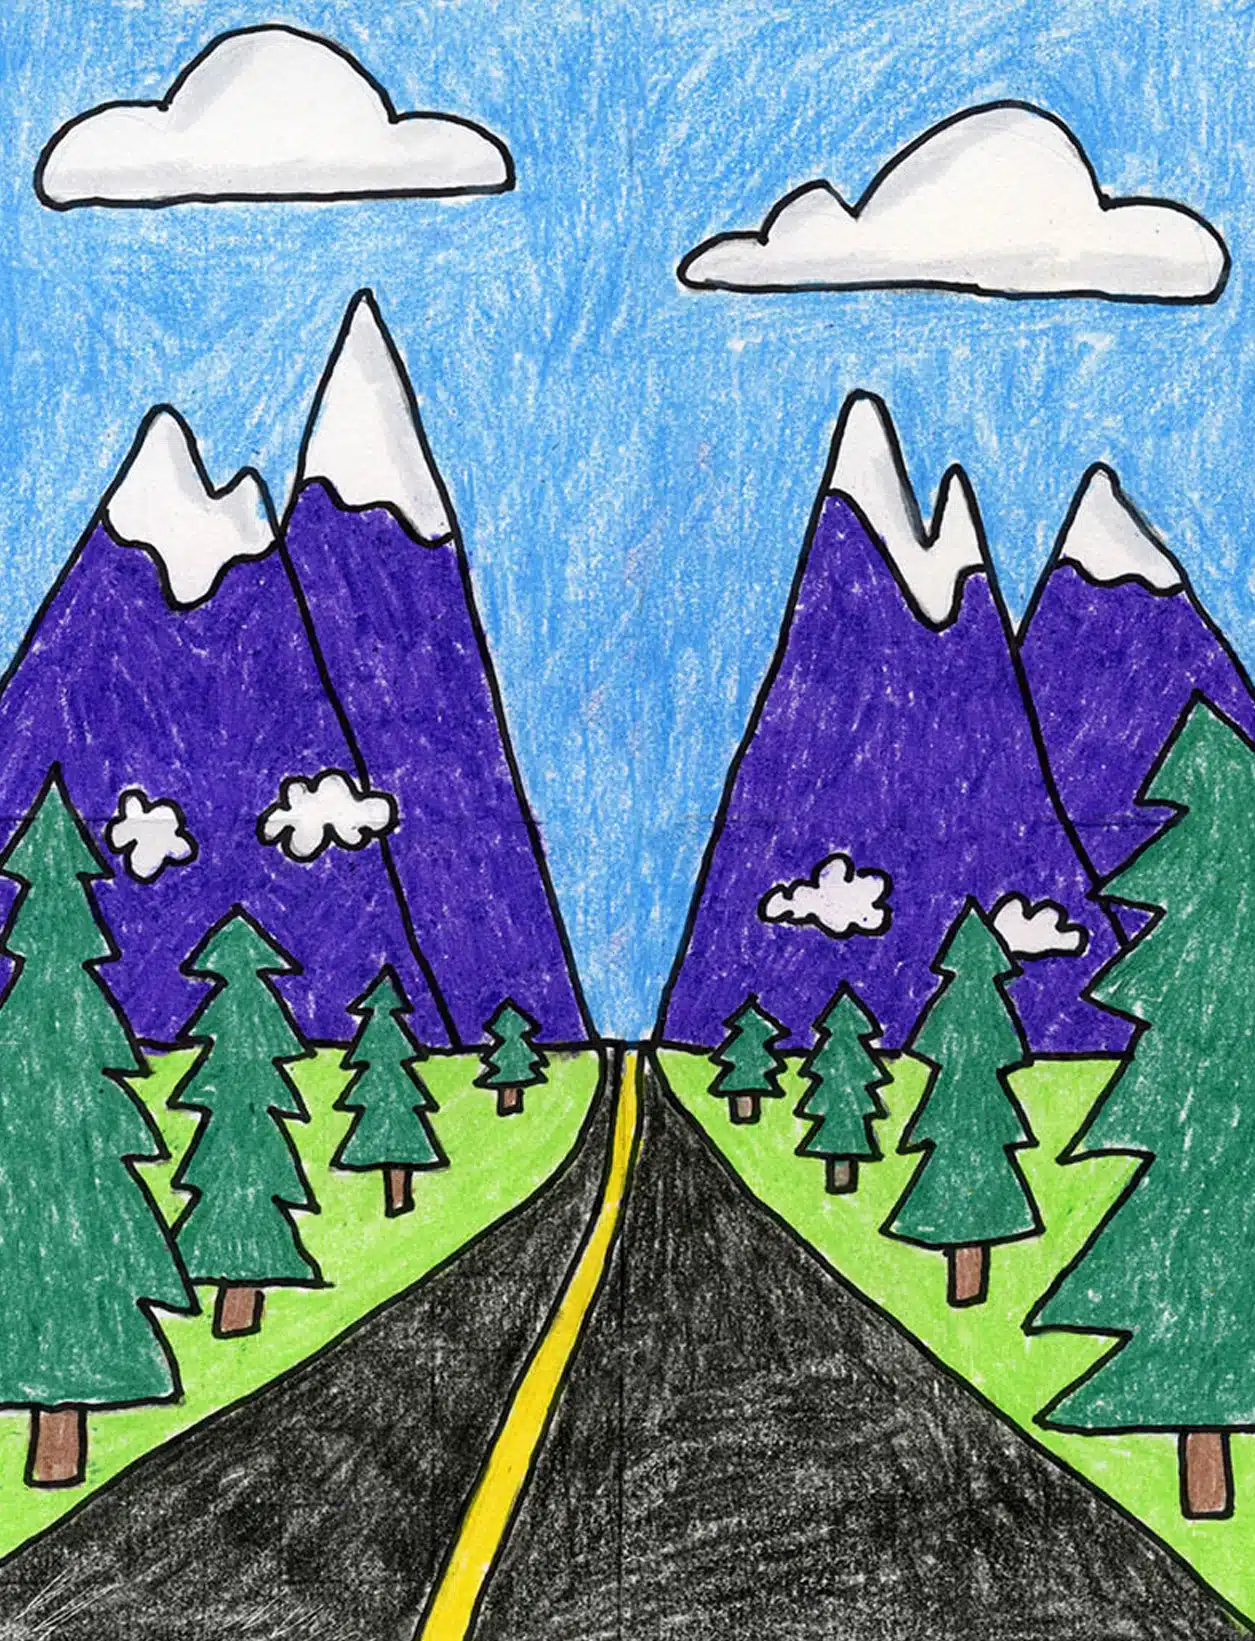 How to draw Landscapes in Perspective Tutorial Video and Landscape Coloring Page